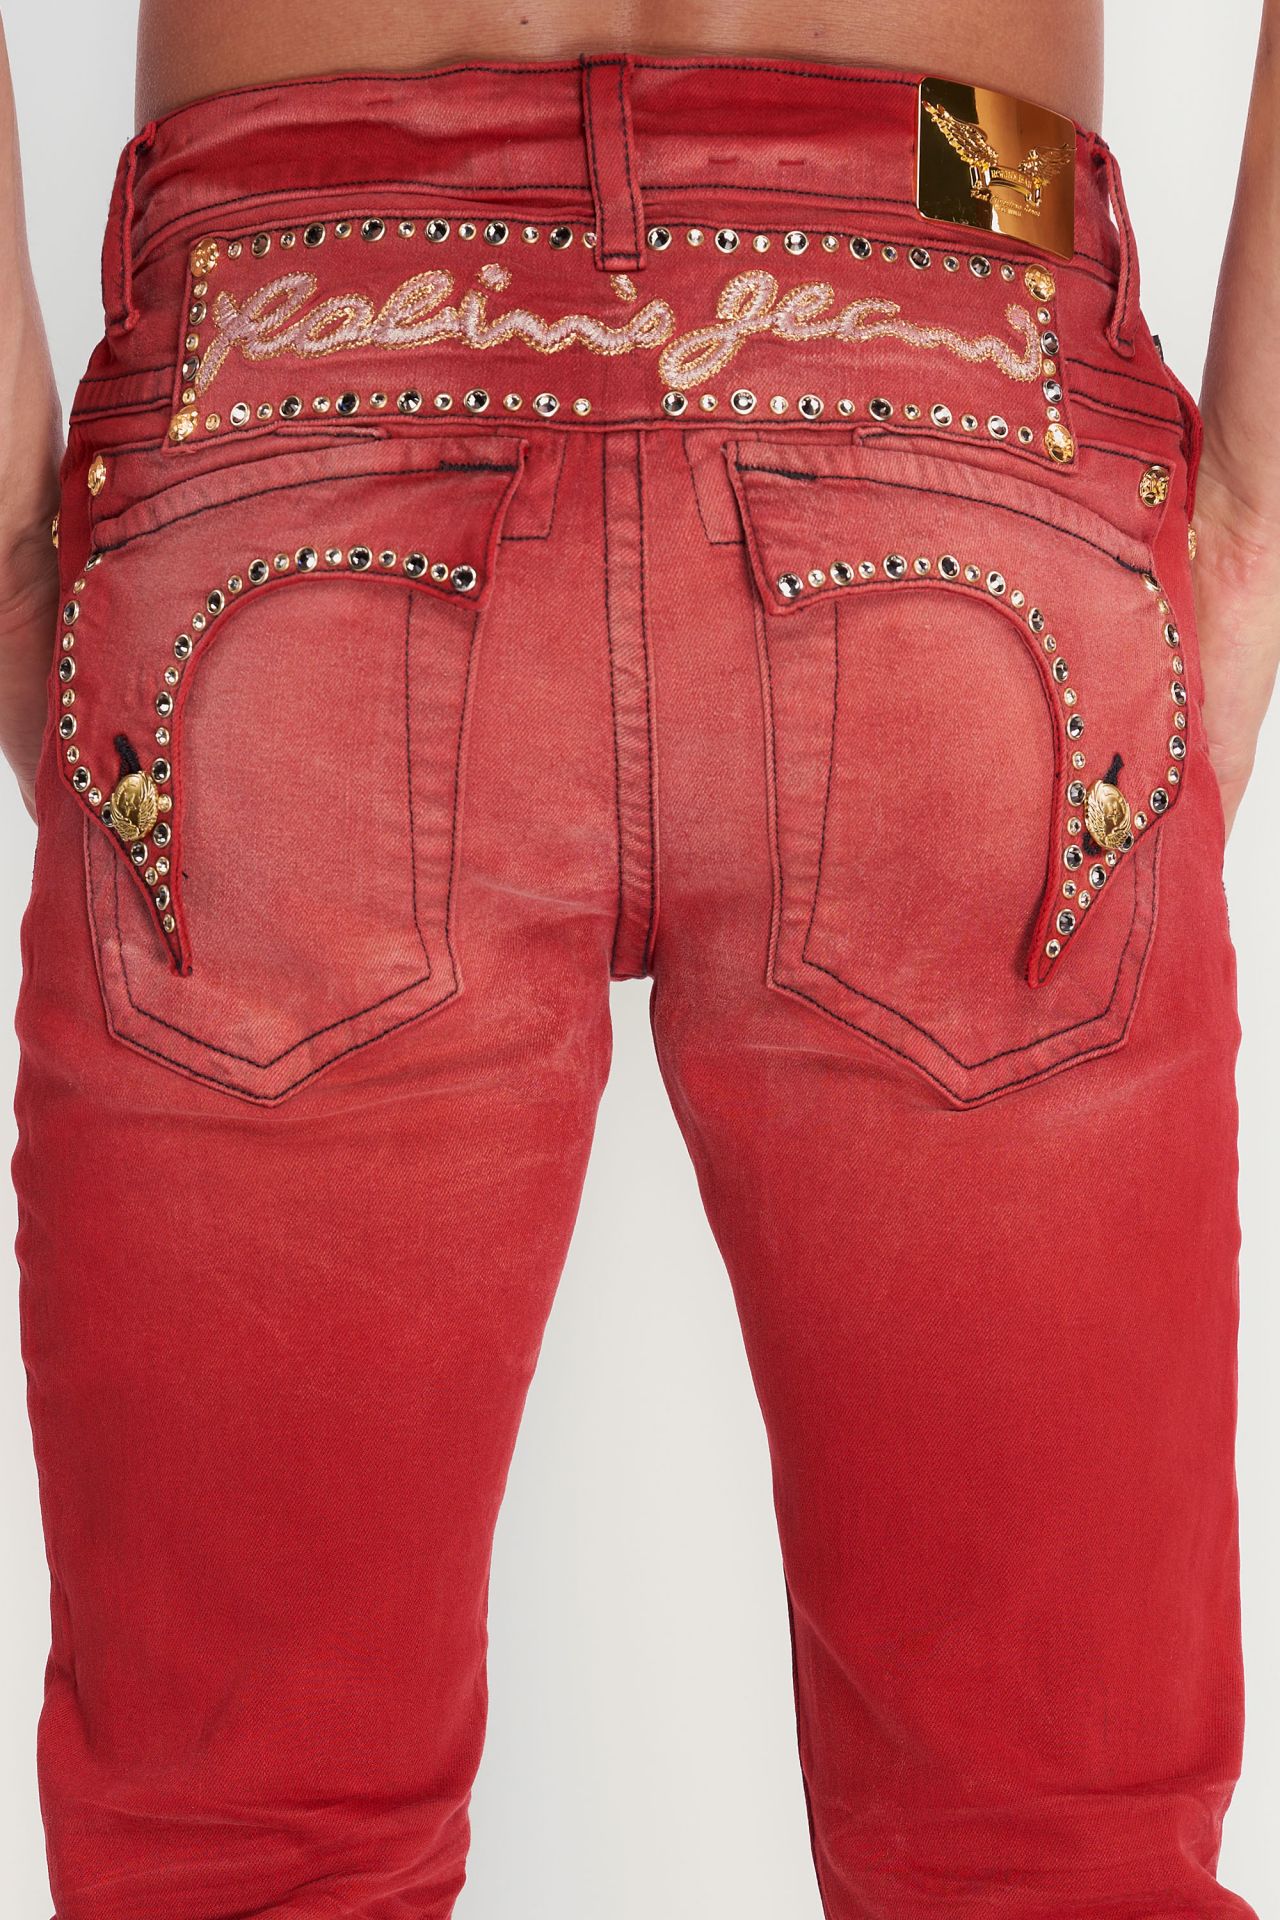 KILLER FLAP  SKINNY MENS JEANS IN F-UP RED WITH CRYSTALS